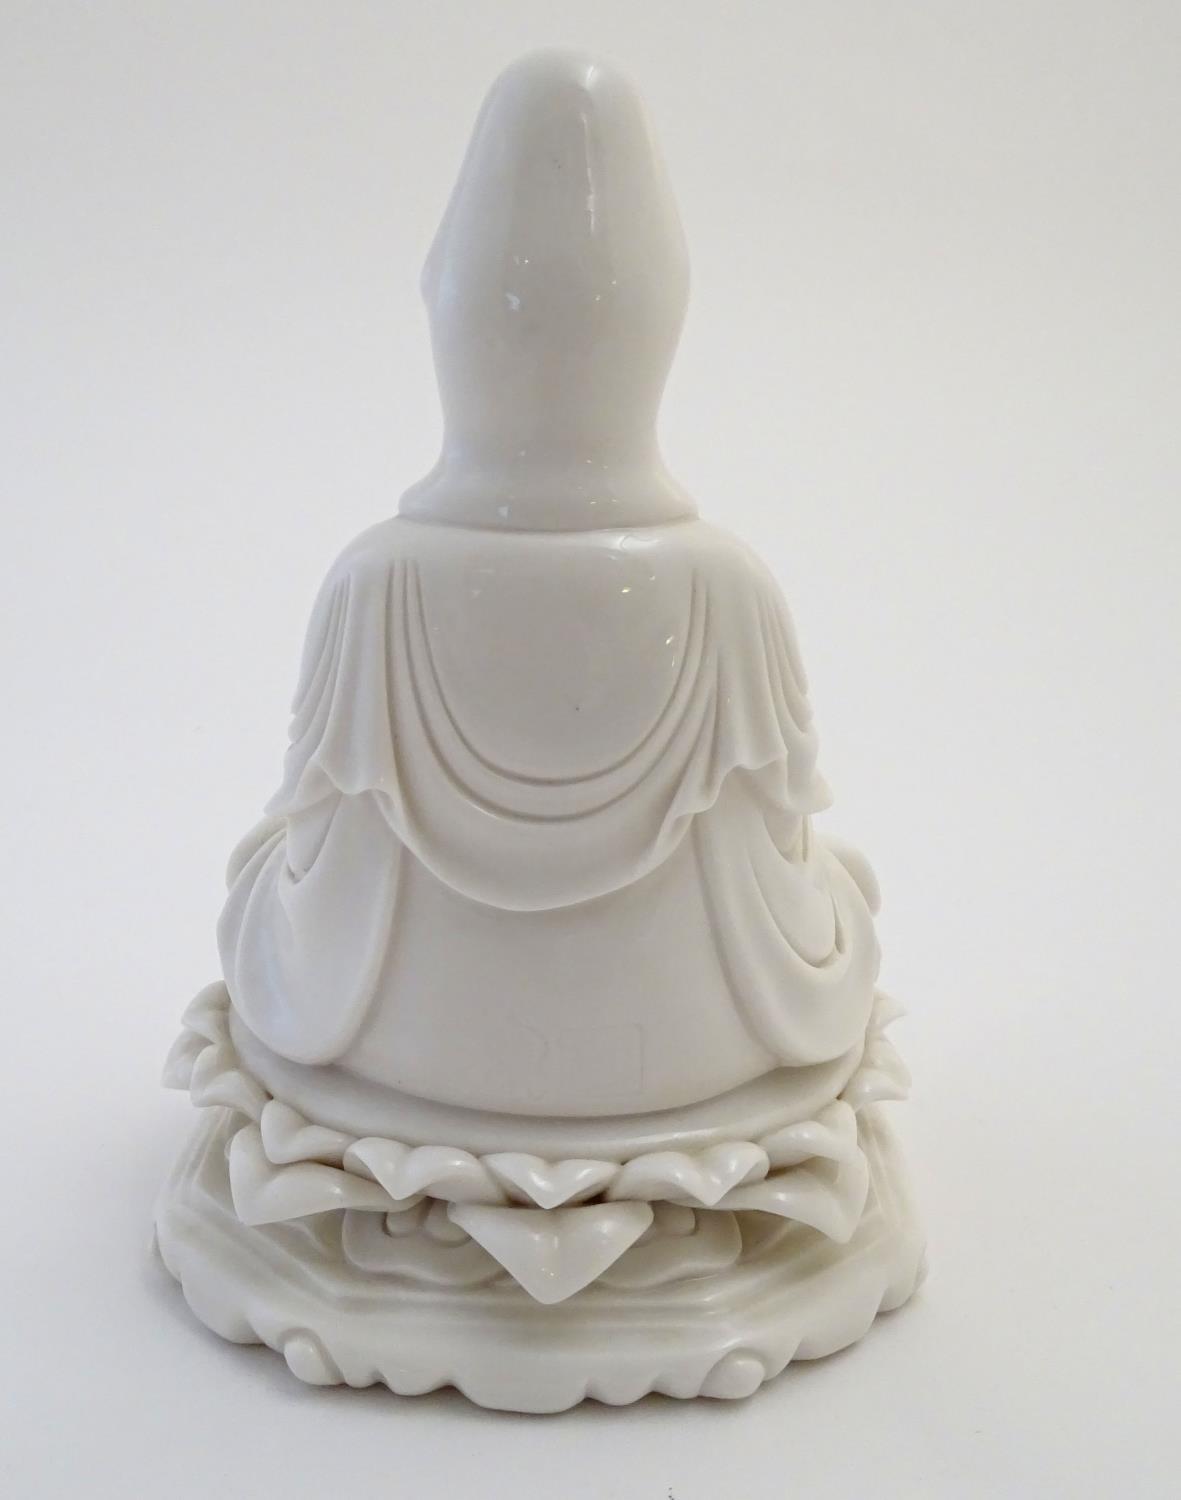 A Chinese blanc de chine figure depicting Guanyin seated on a lotus flower base. Approx. 7 1/2" high - Image 8 of 16